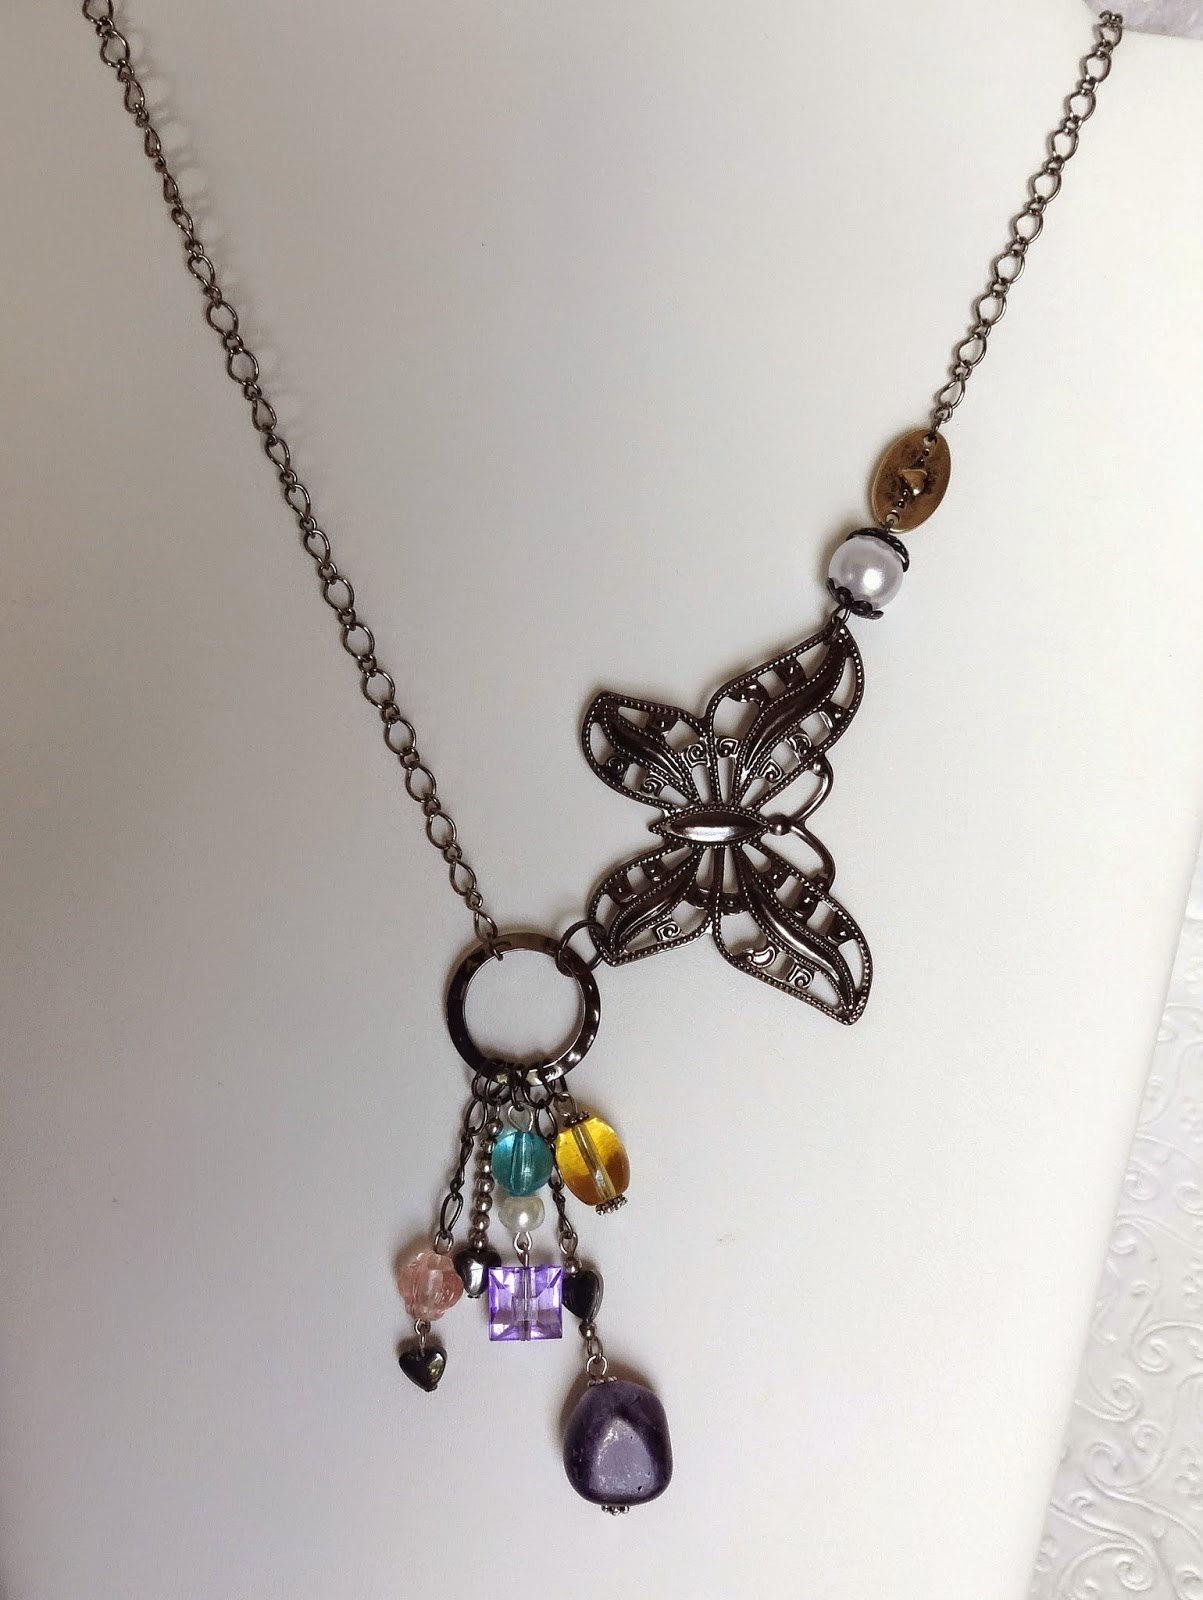 https://www.etsy.com/listing/205326993/black-nickel-butterfly-with-dangles?ref=listing-shop-header-0